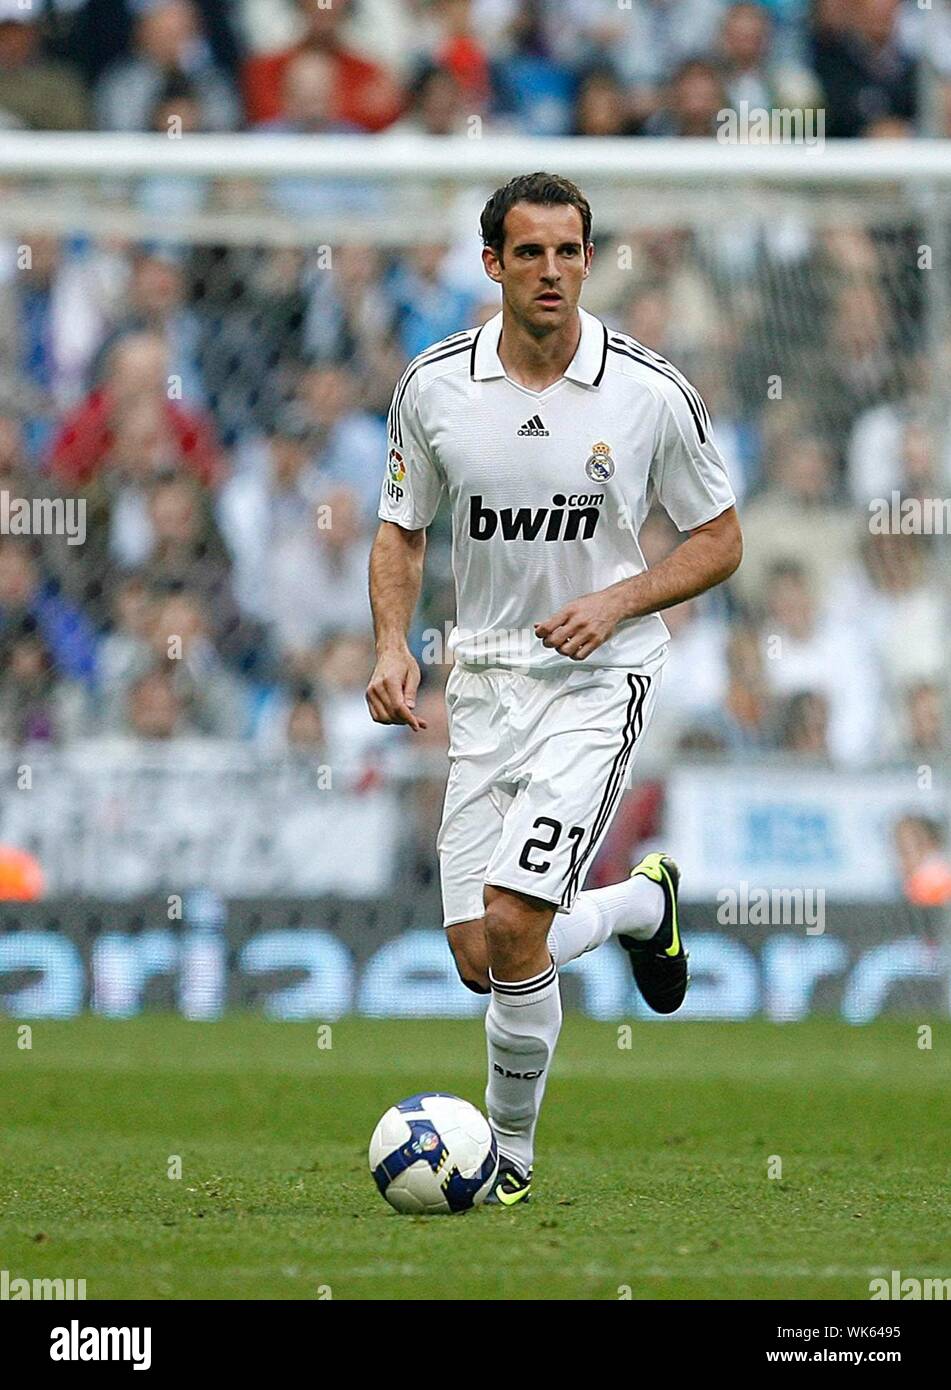 Soccer Spain Christoph Metzelder Single Action Madrid 22 03 09 Spanish League Match Real Madrid Vs Almeria Pictured Christoph Metzelder Copyright By Firosportphoto C Alfaqui Only Use For Germany Our General Terms